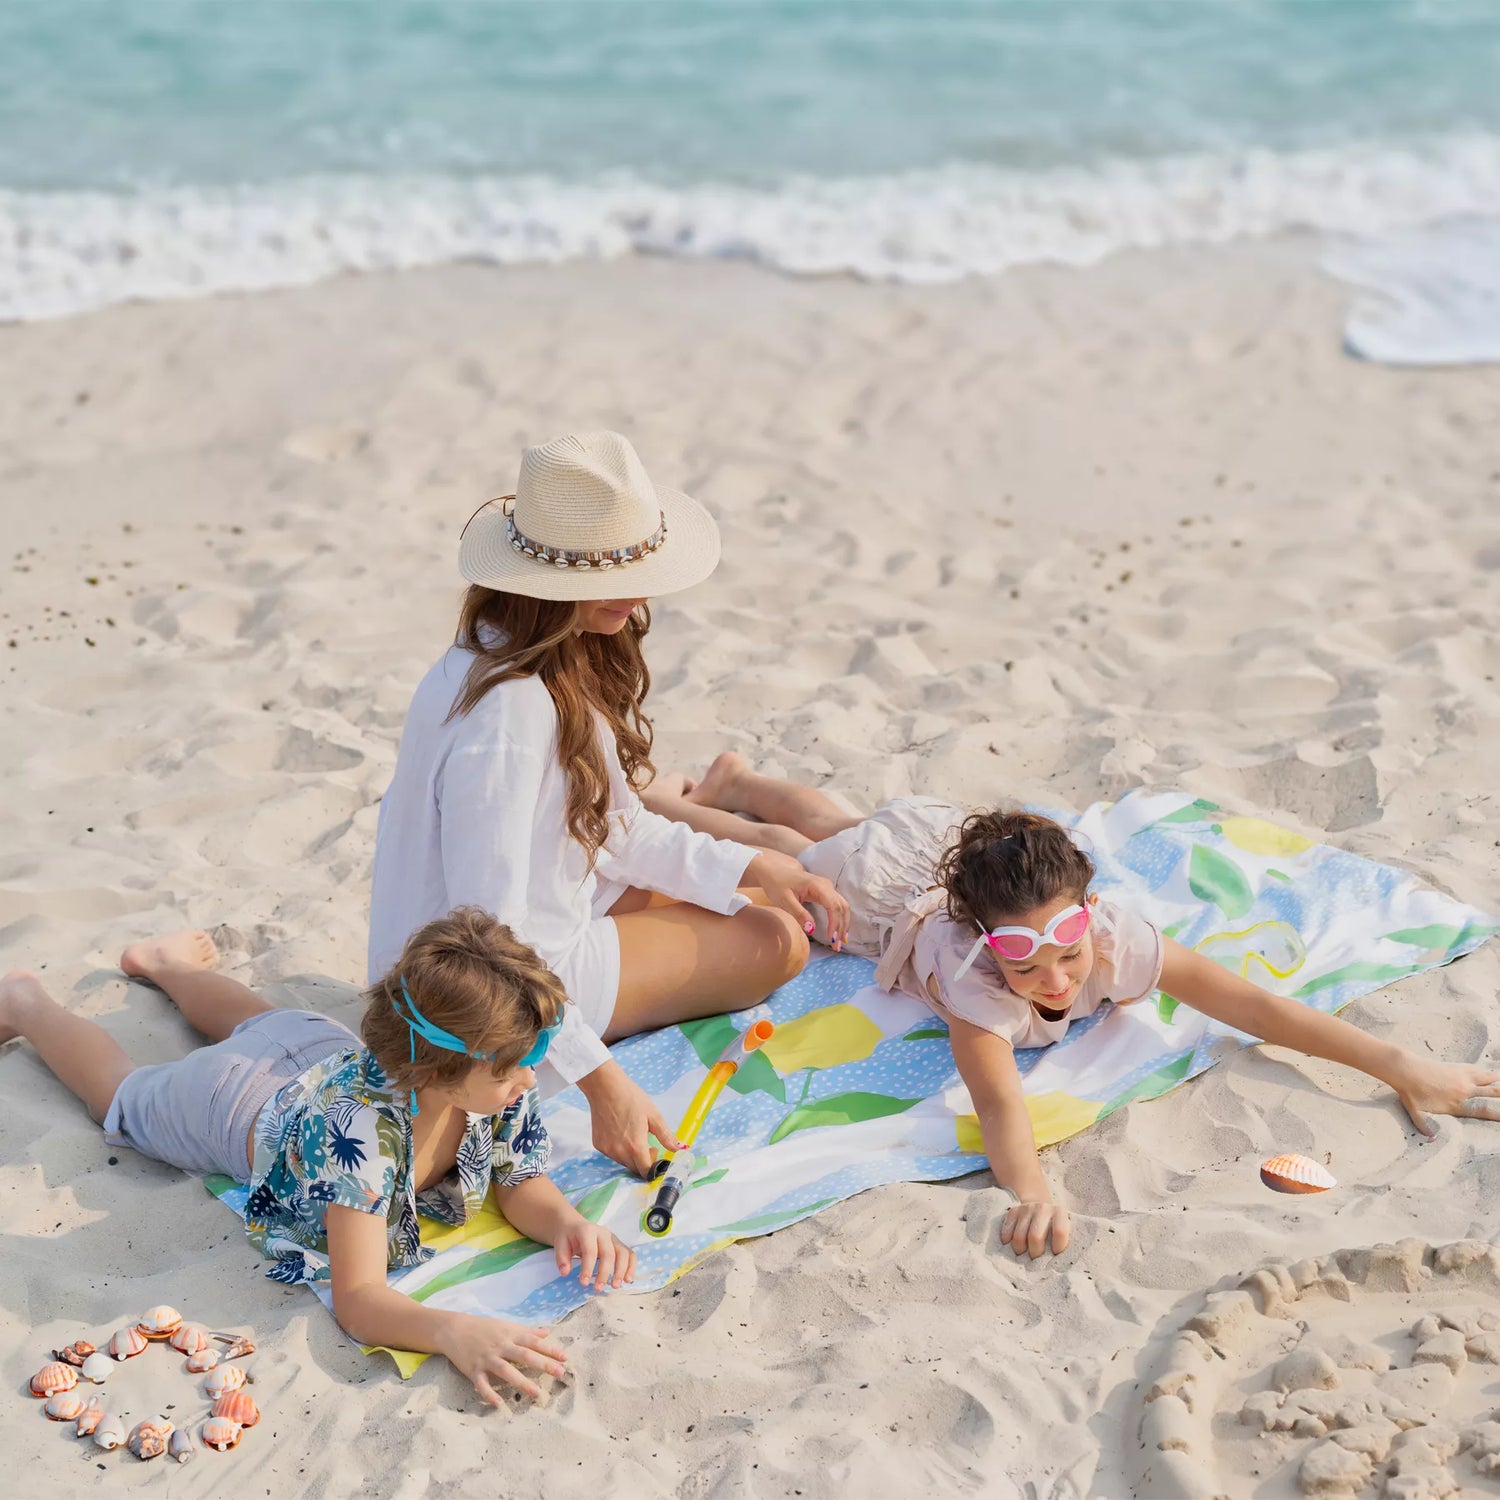 A mom and her kids sitting on a Quick Dry, Sand Free, Light Weight, Compact and Ecofriendly Microfiber Beach Towel from La Toalla on the sand